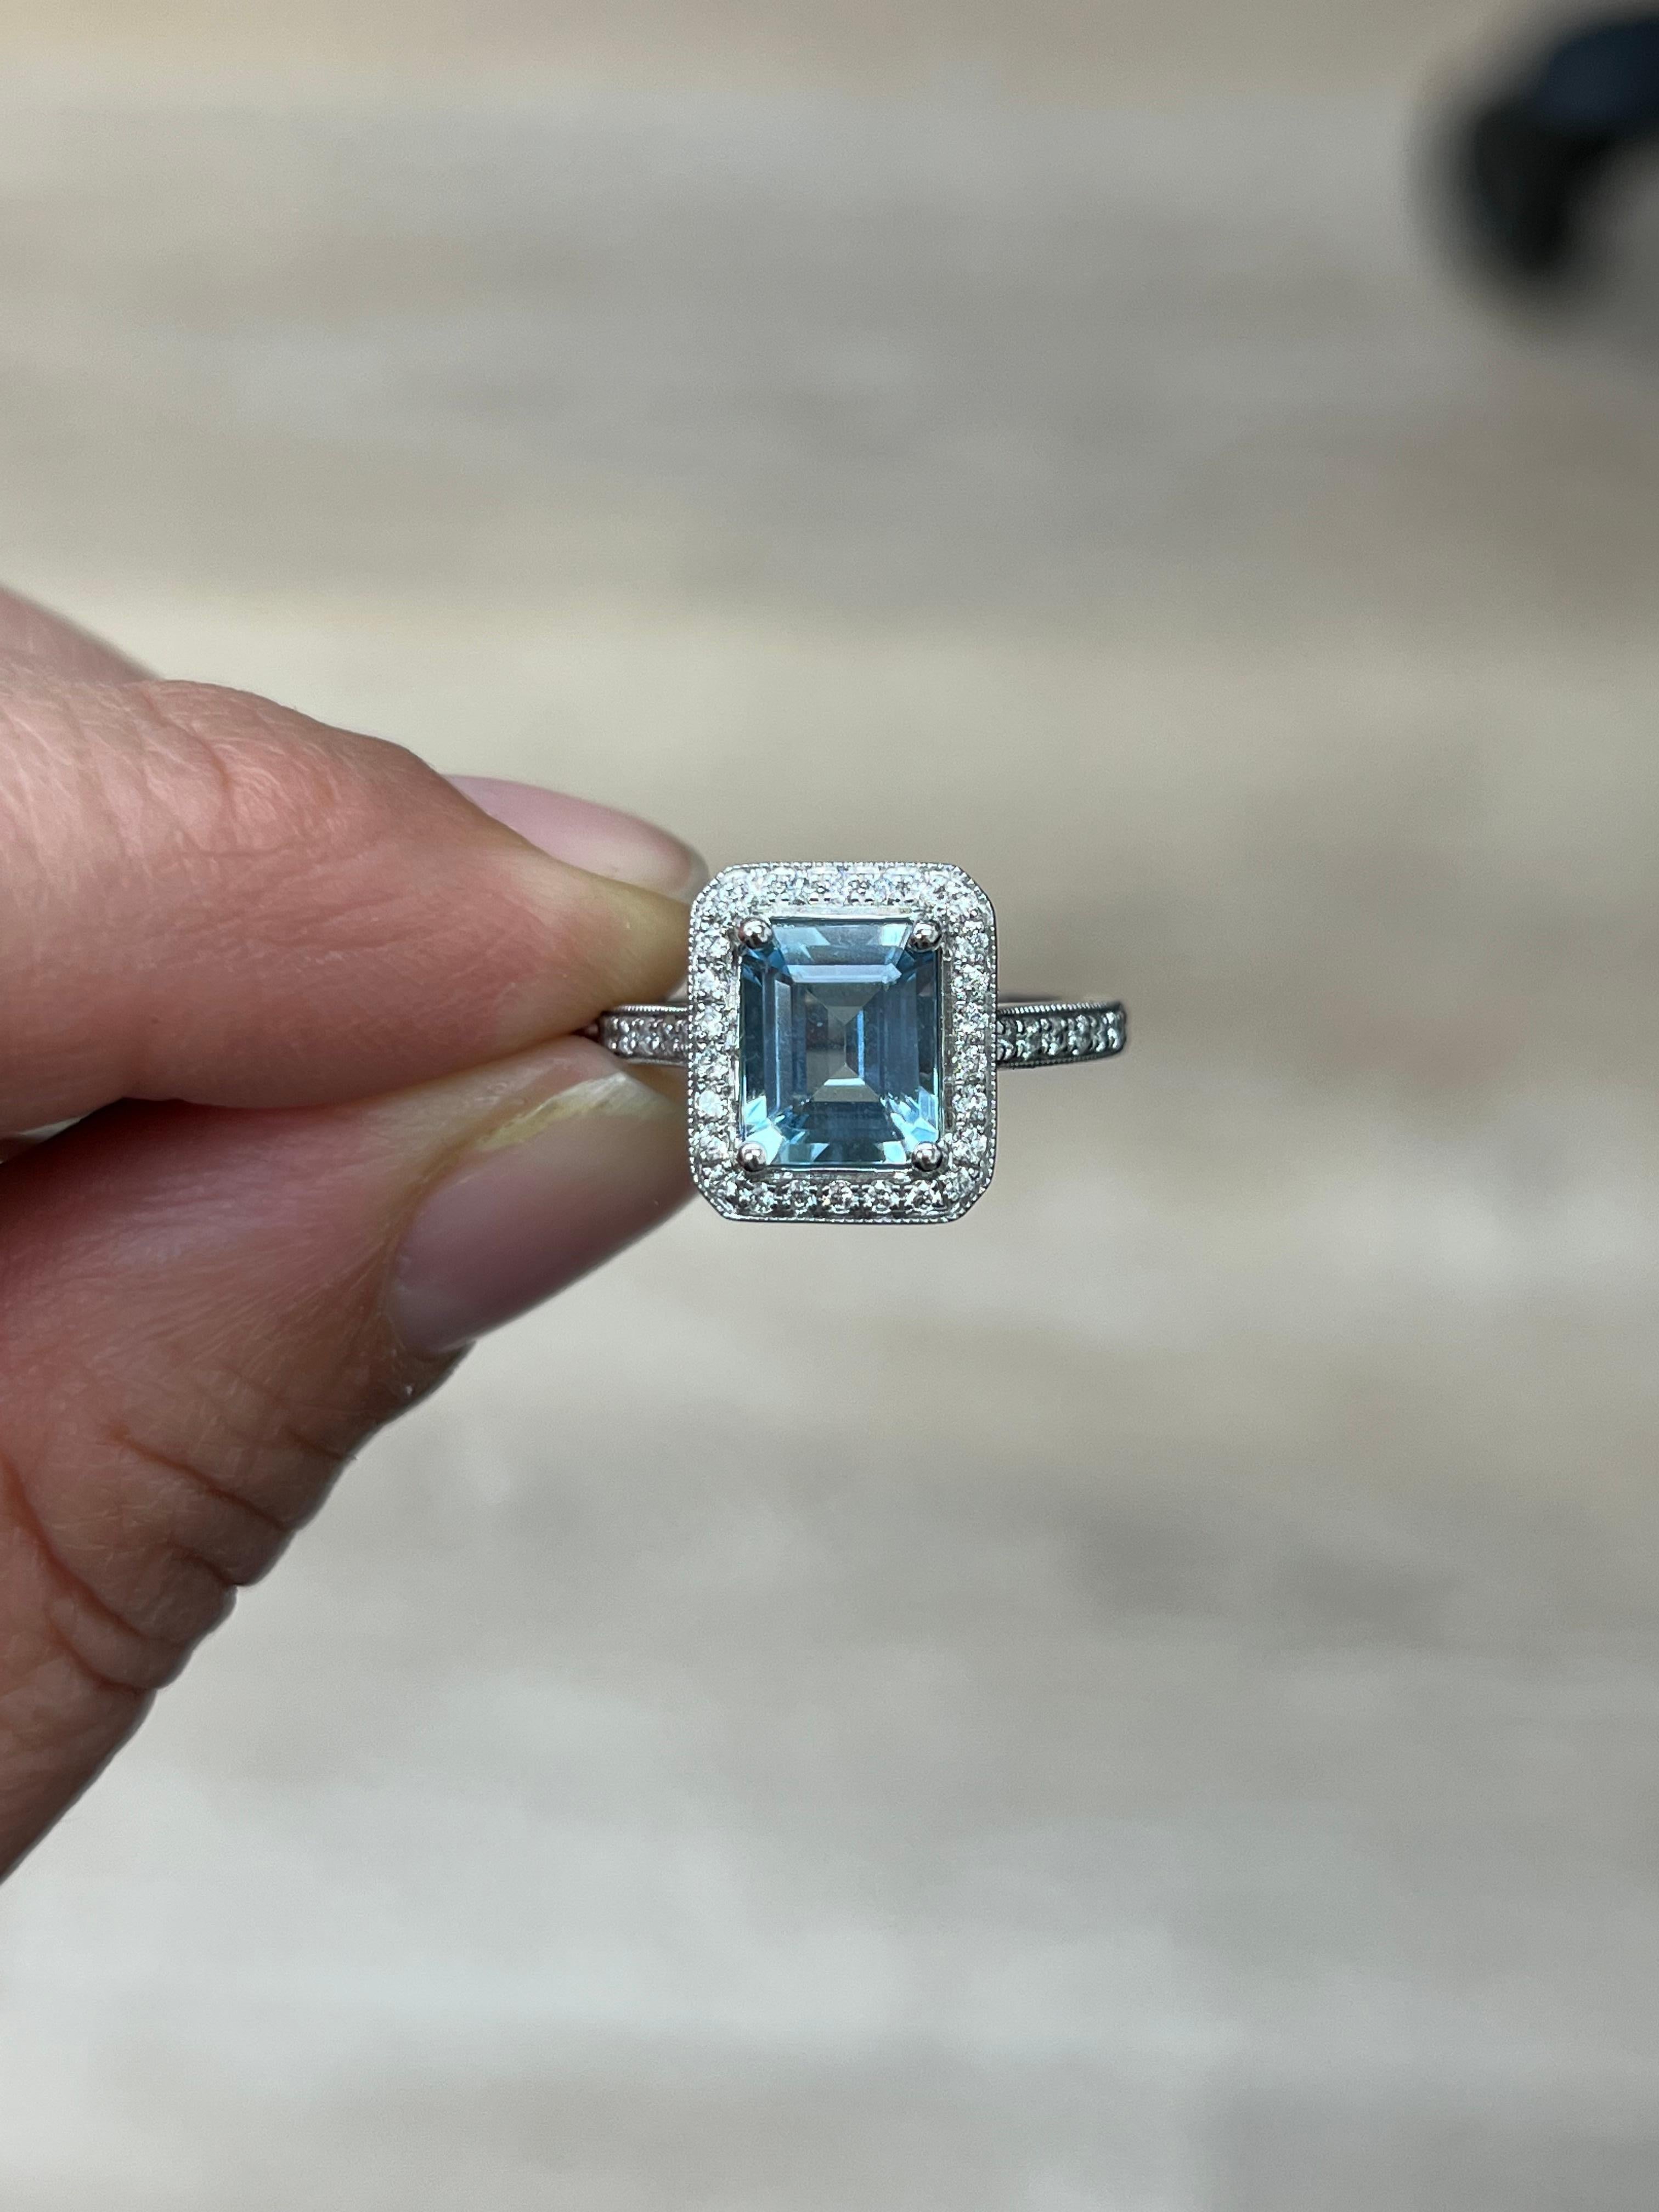 14K white gold diamond and aquamarine ring

Features
14K white gold
1.88 carat aquamarine measure 8x7 mm
.44 carat total weight in diamonds
The top of the ring measures 13x11 mm.
The ring band measures 2mm width
Ring size 7 
